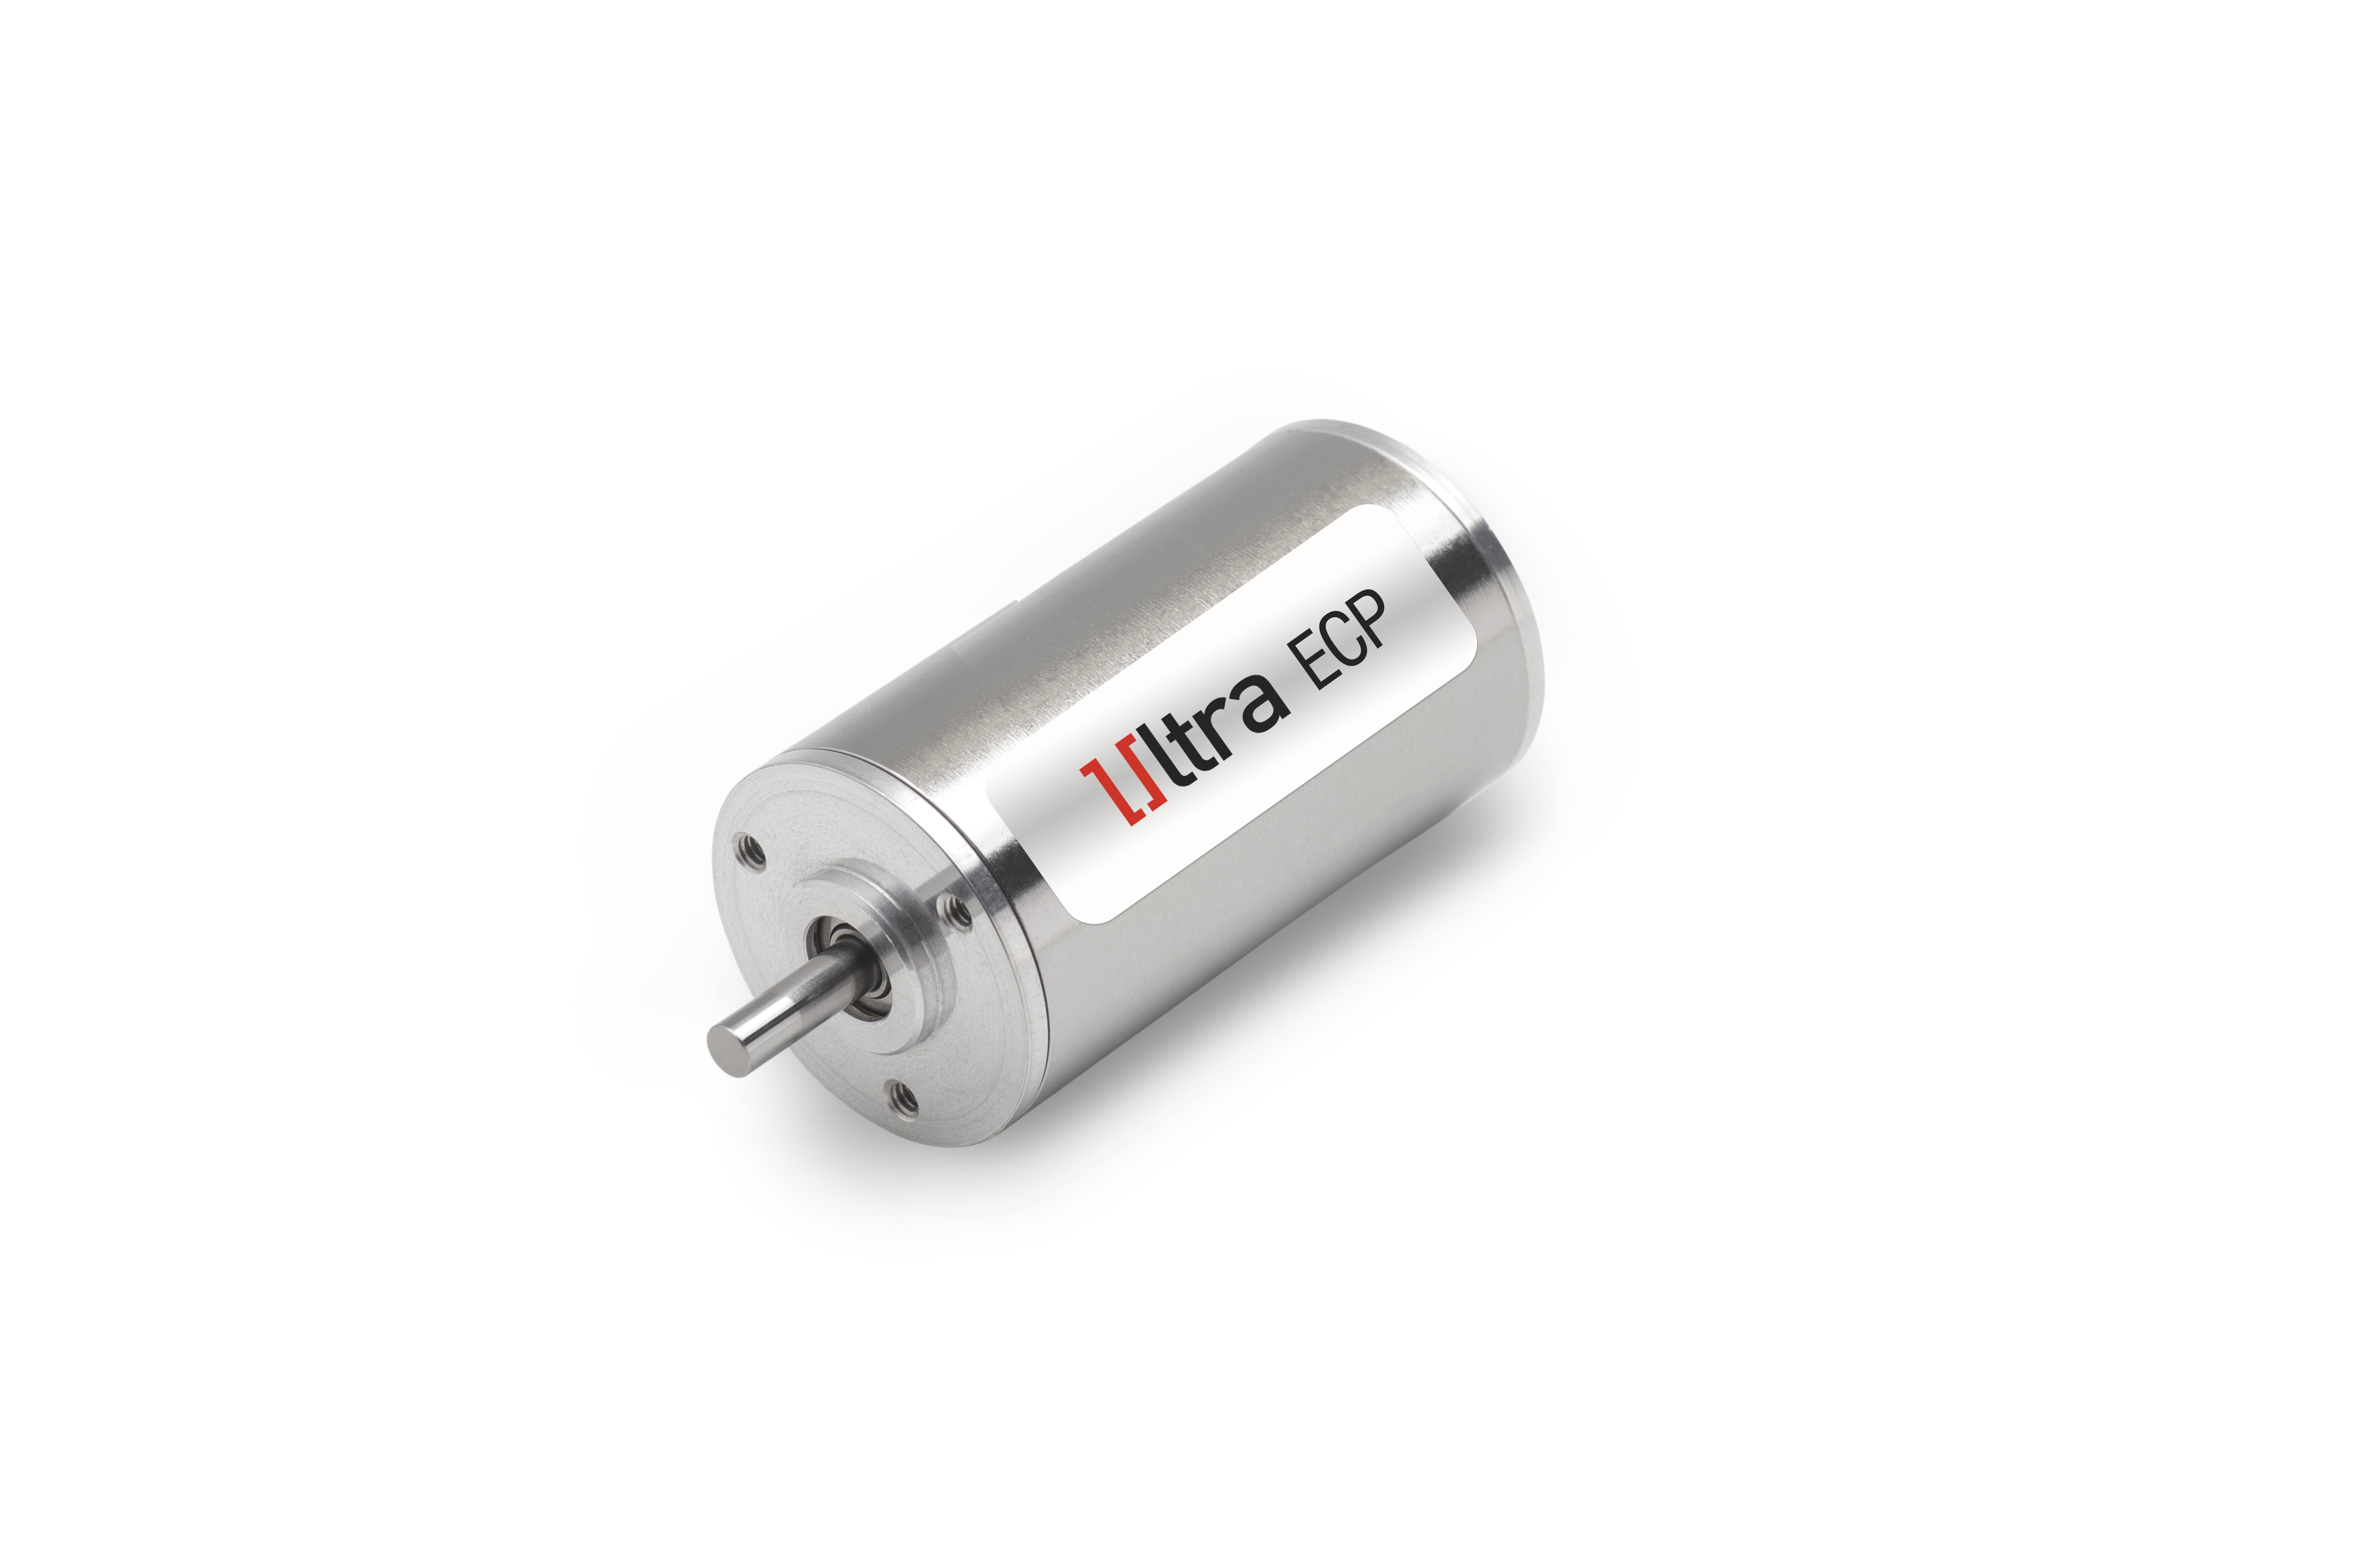 Portescap Expands Their Ultra EC Brushless DC Motor Platform With 22ECP-2A Motors Featuring An Integrated Driver